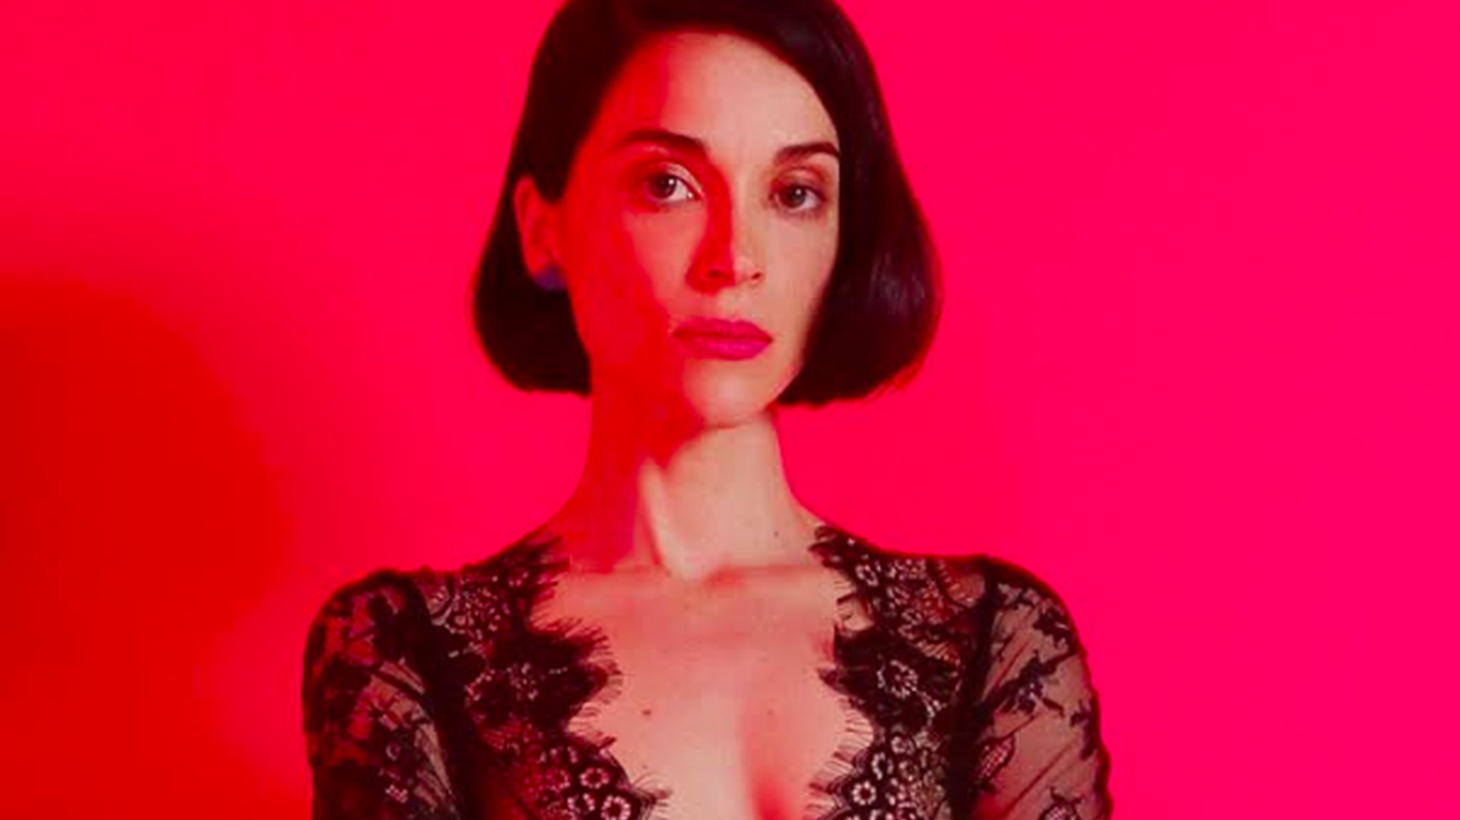 St. Vincent (aka Annie Clark) stops by for a short acoustic set at 10am. The art pop star will play songs from her critically acclaimed album MASSEDUCTION.